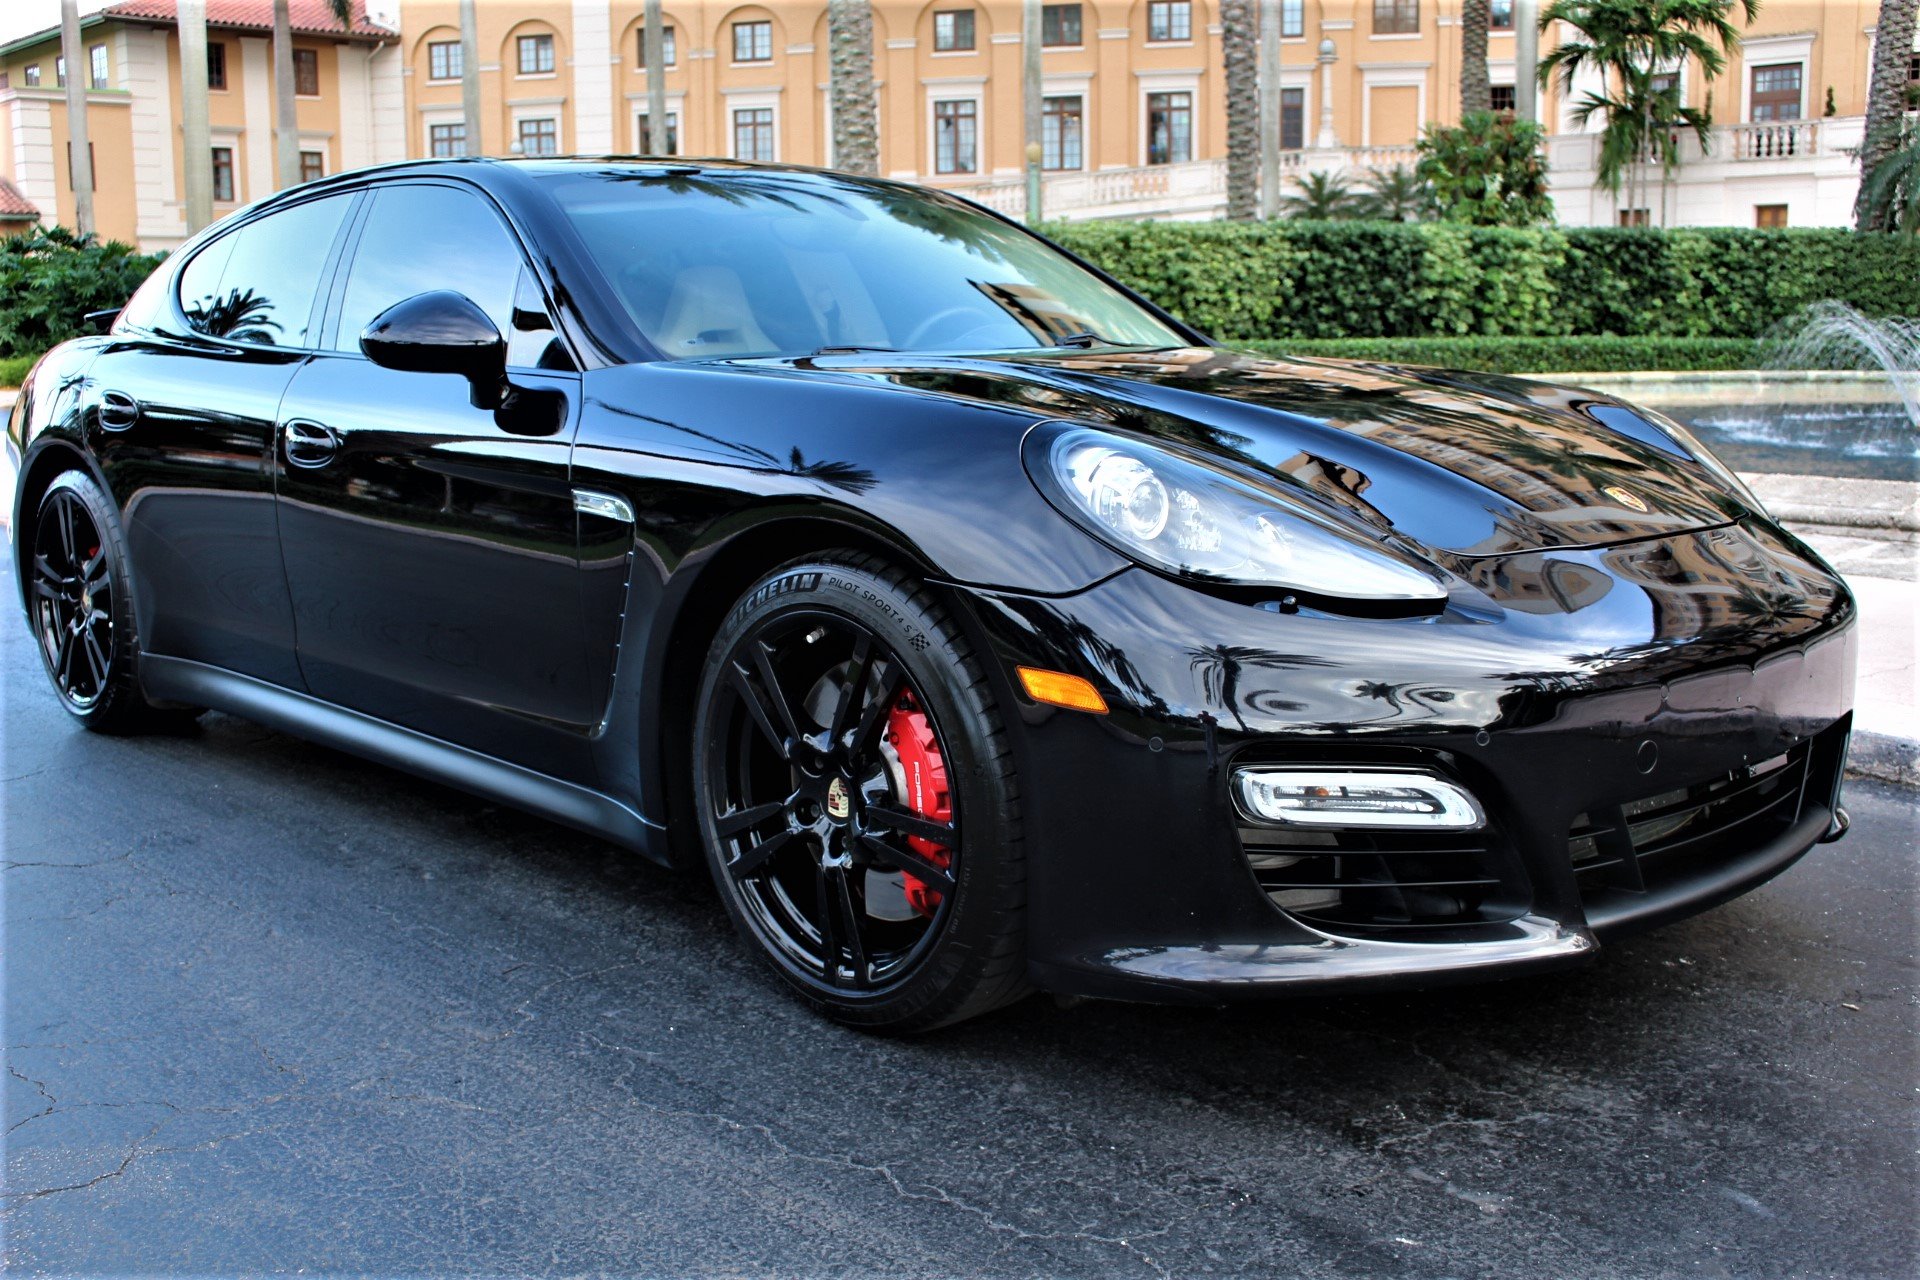 Used 2013 Porsche Panamera GTS for sale Sold at The Gables Sports Cars in Miami FL 33146 2